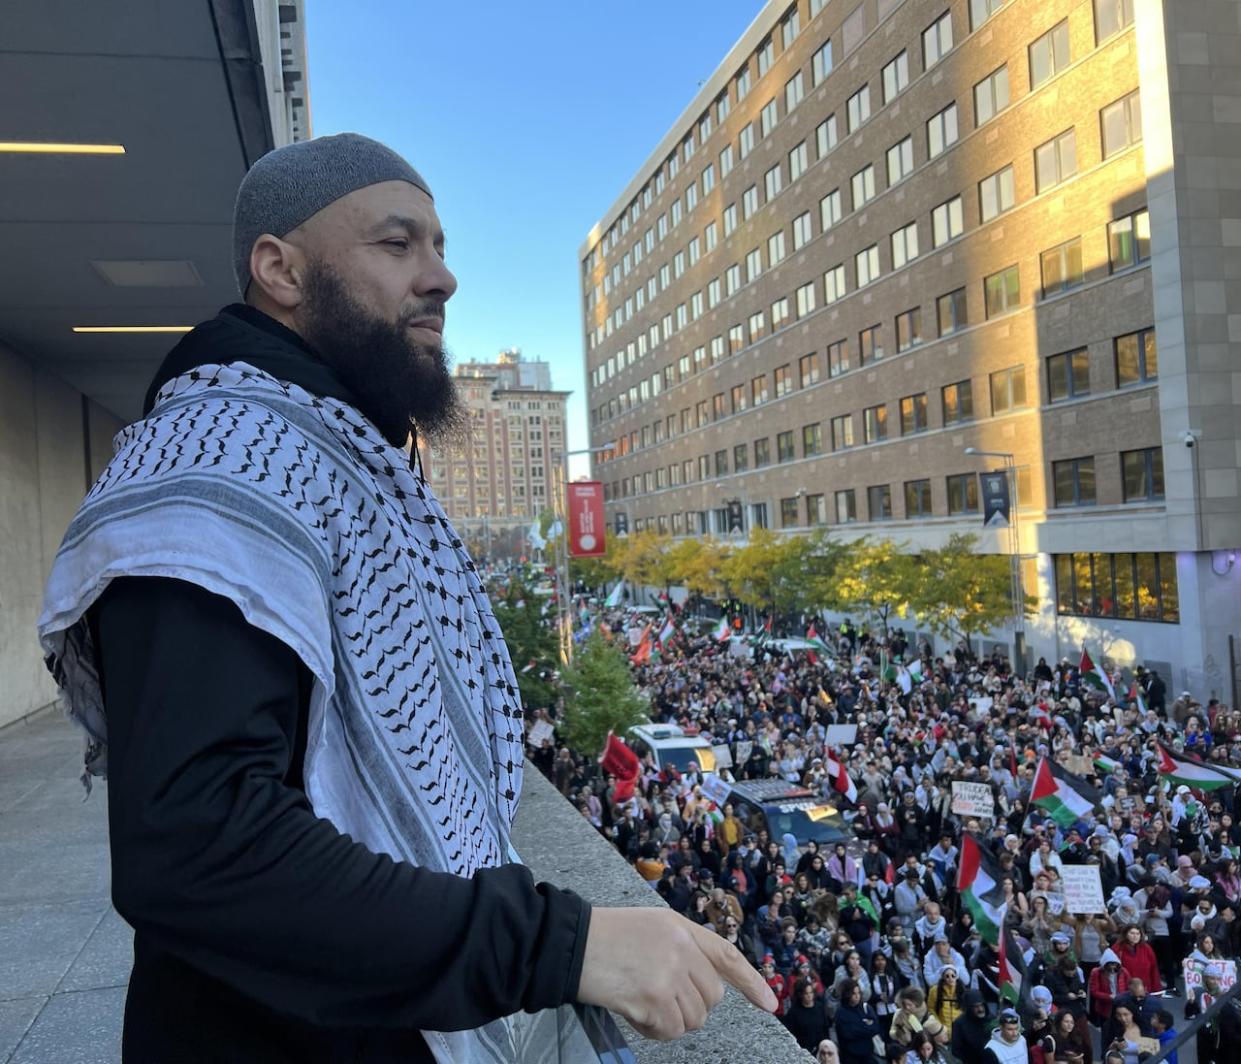 Adil Charkaoui's speech has drawn broad condemnation from politicians like Premier François Legault and groups like the Centre for Israel and Jewish Affairs. (Adil Charkaoui/X - image credit)